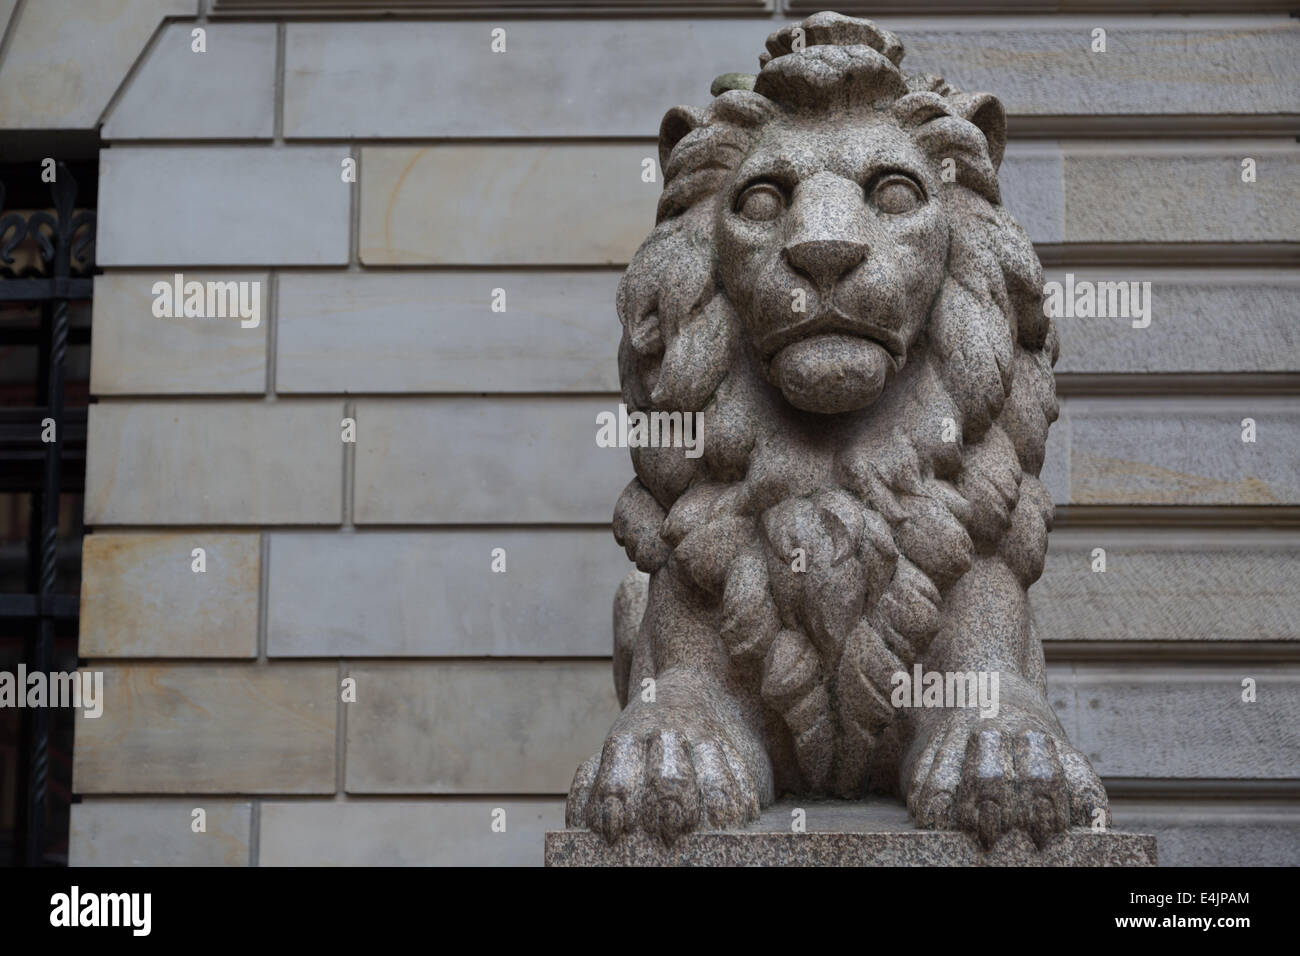 A close up photograph of a lion statue outside the Town Hall (Rathaus) in Hamburg. Stock Photo